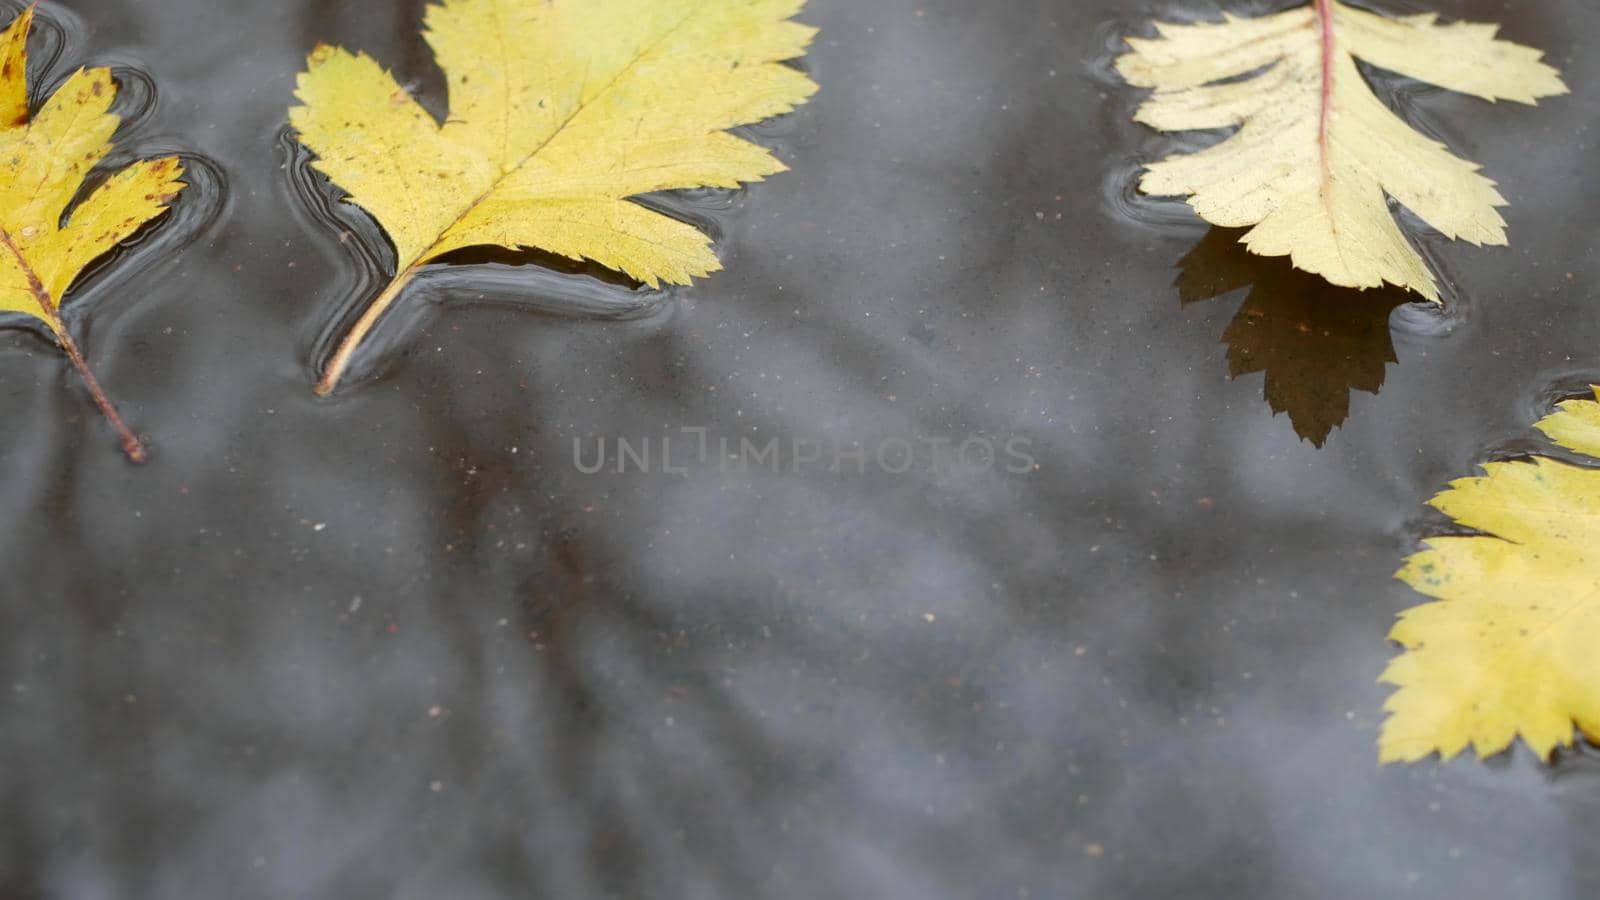 Yellow autumn fallen oak leaves, puddle on grey asphalt. Fall bare leafless tree branches reflection in water. Wet leaf and rain drops close up, waves ripple from raindrop. Gloomy melancholic weather.